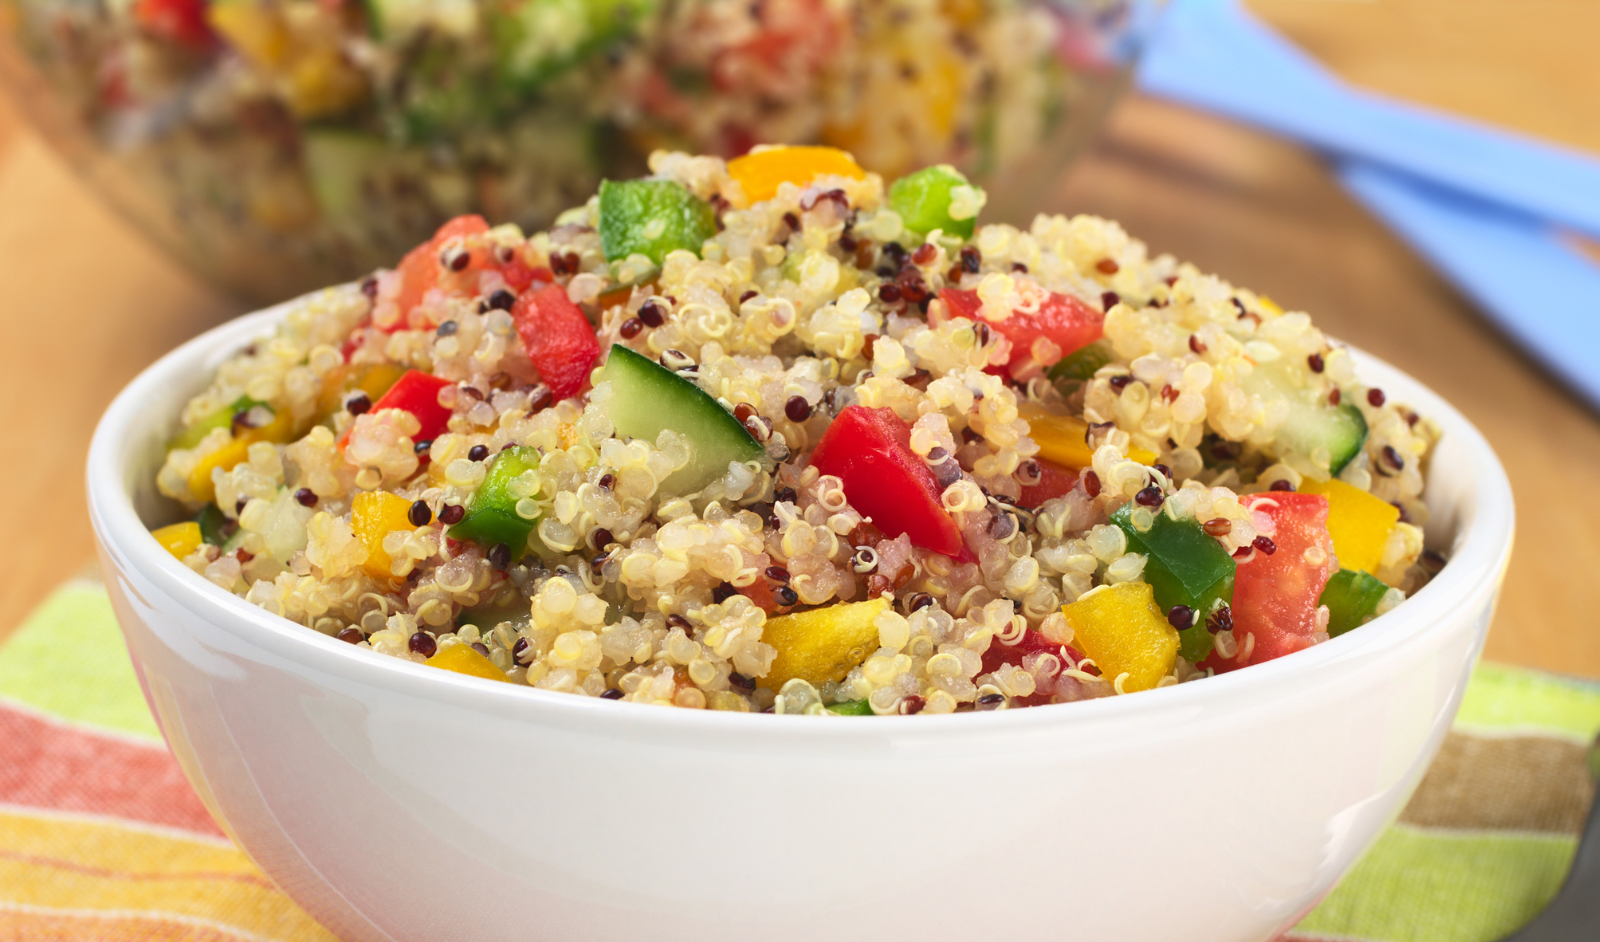 Quinoa: Benefits, Nutrition, and Facts